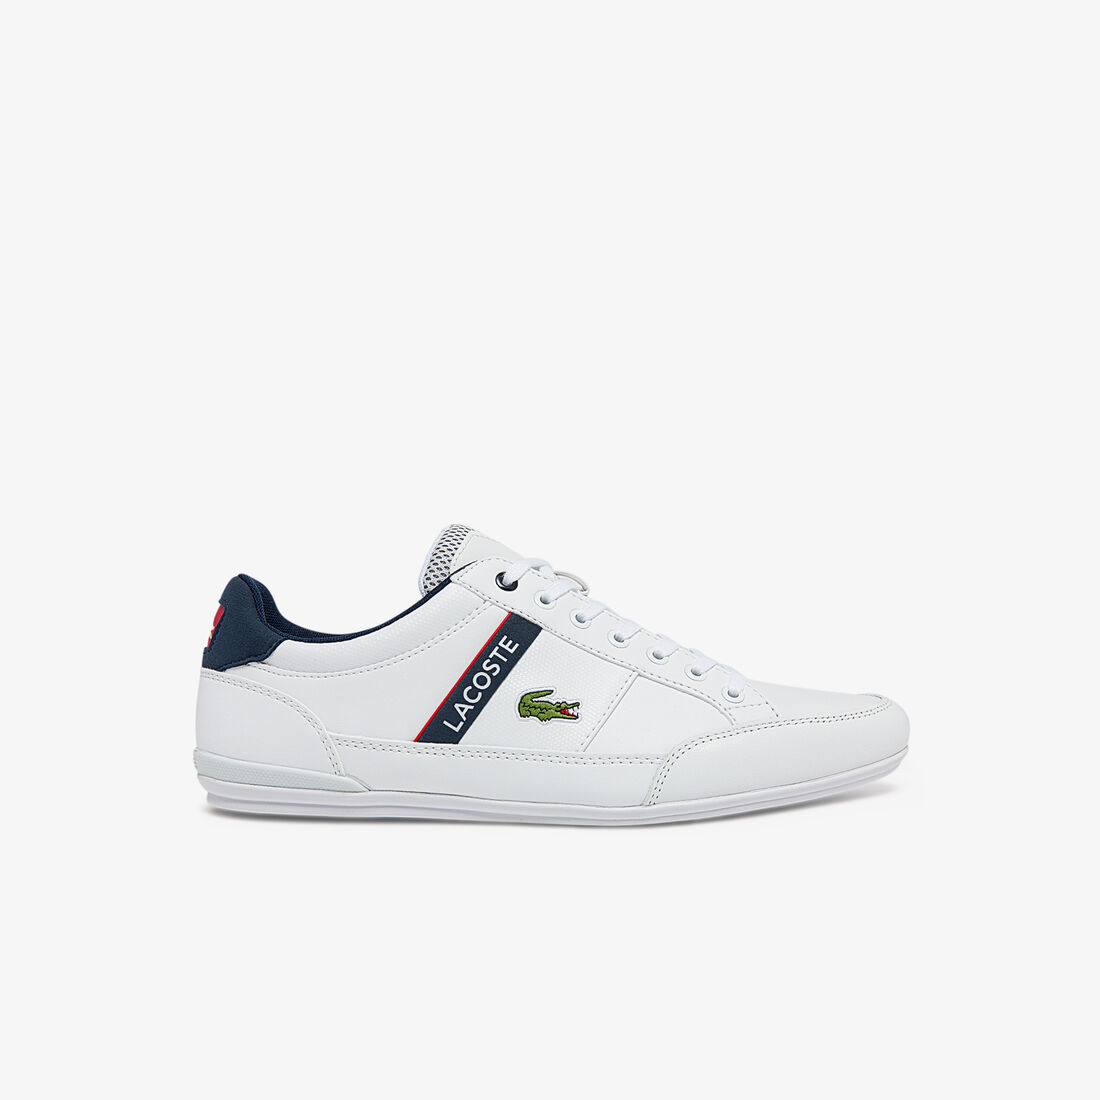 Lacoste Chaymon Textil And Synthetik Sneakers Herren Weiß Navy Rot | TKPR-62874